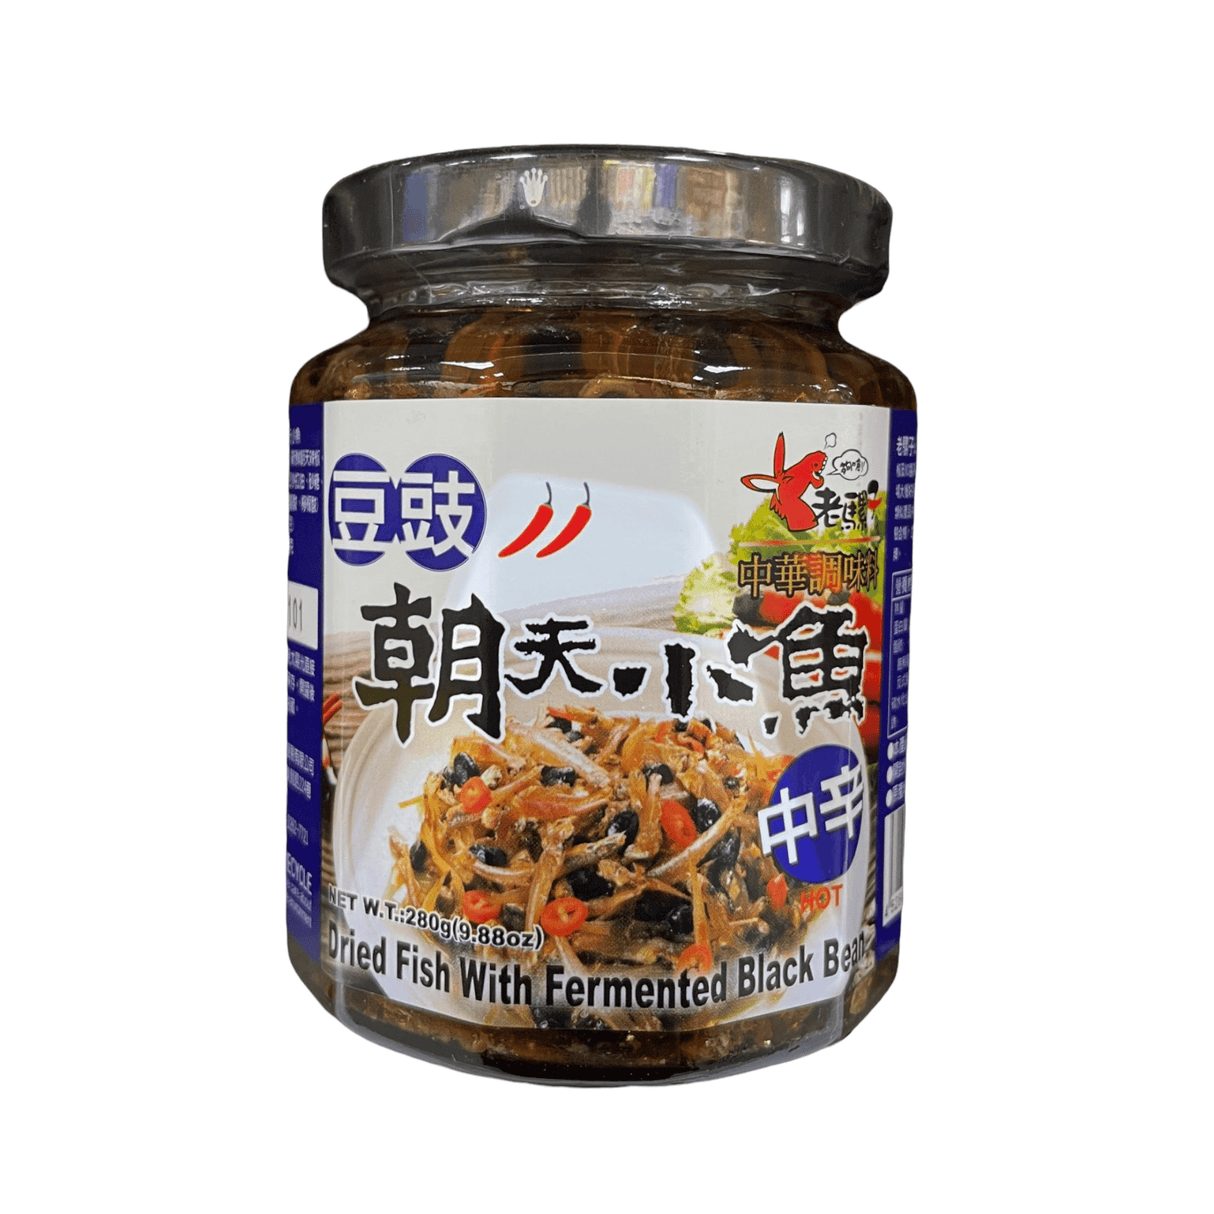 LLZ Dried Fish with Fermented Black Bean